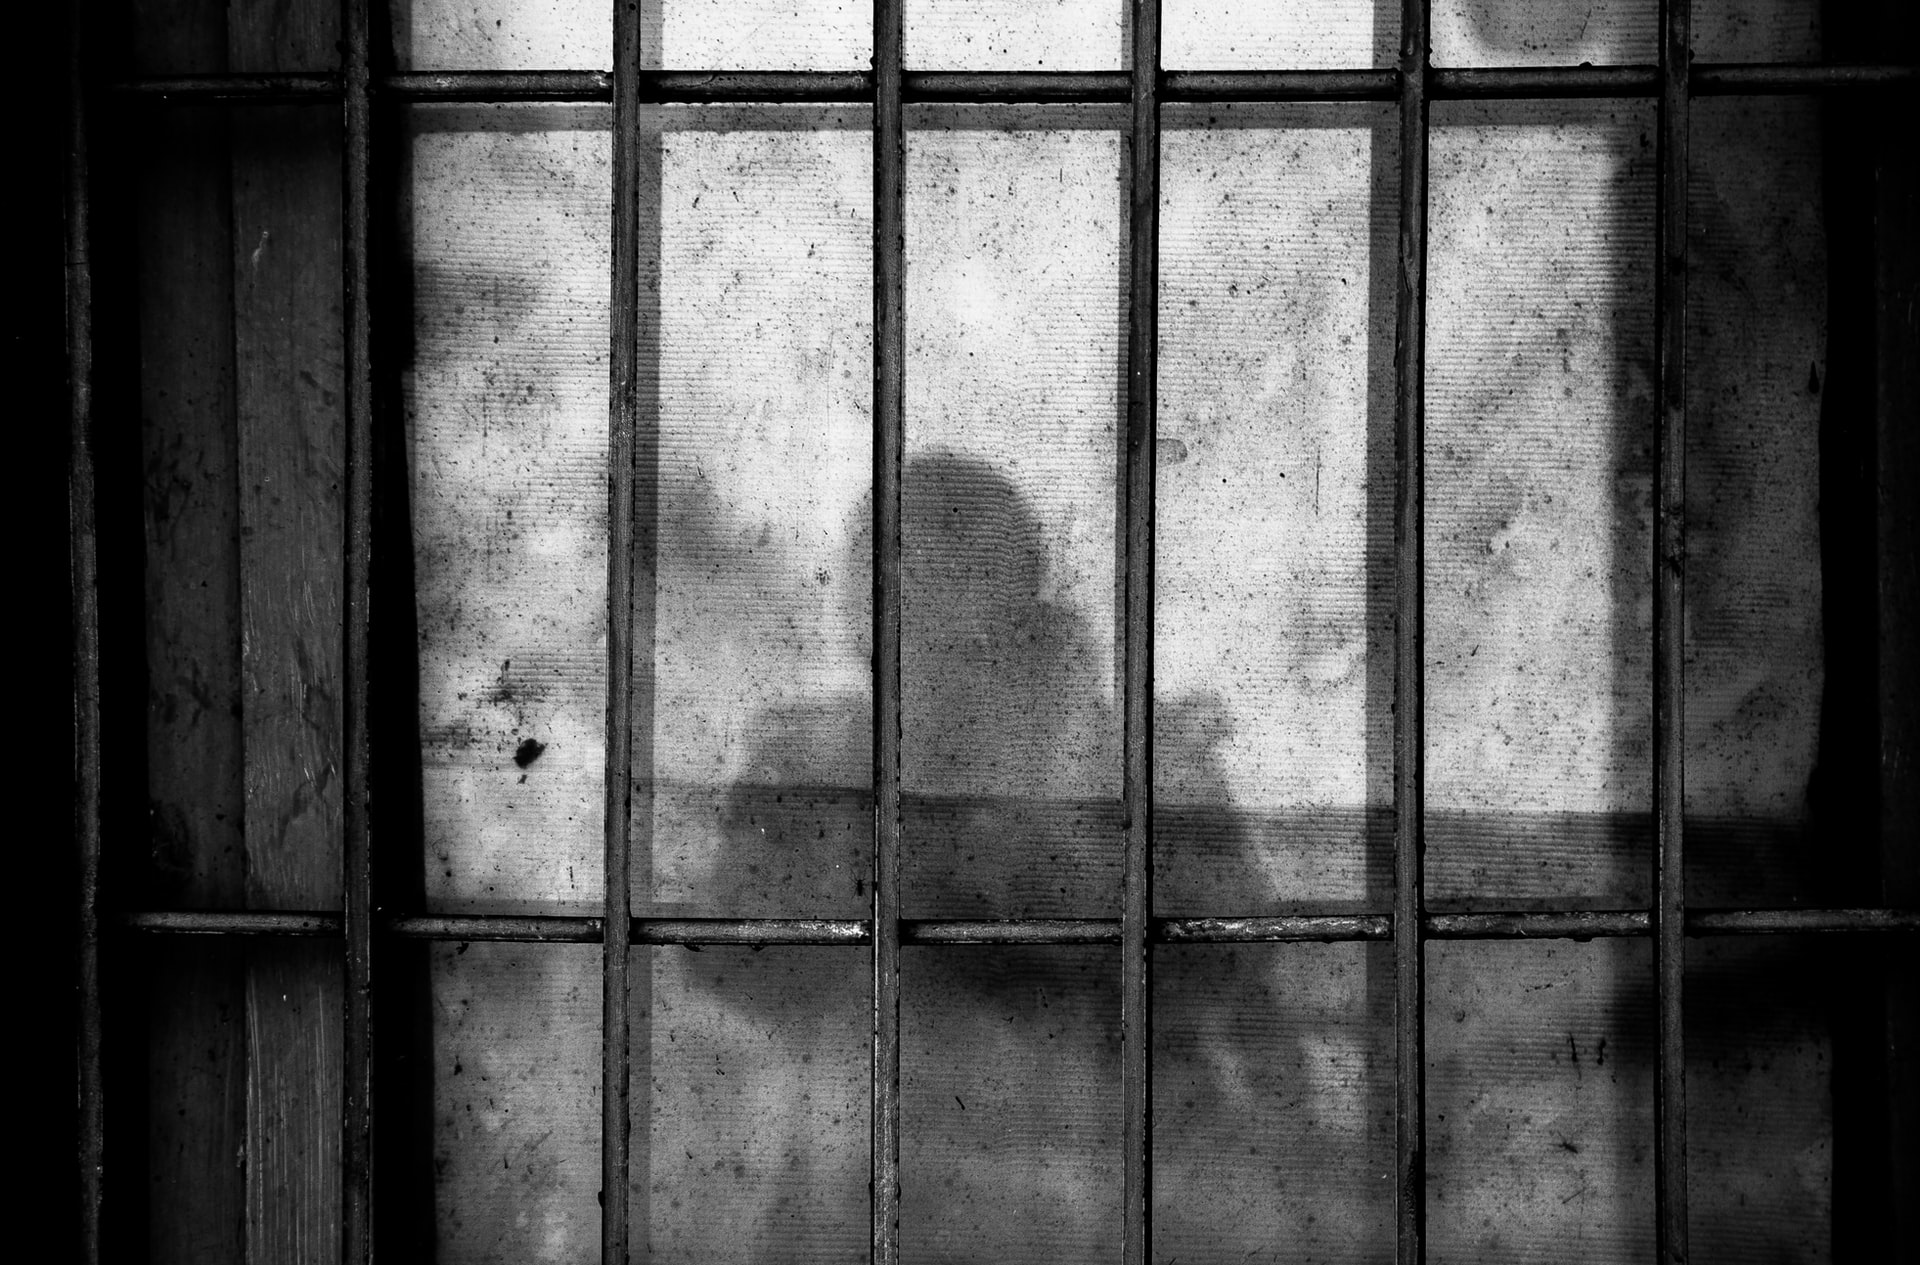 jail cell with a shadow of a person